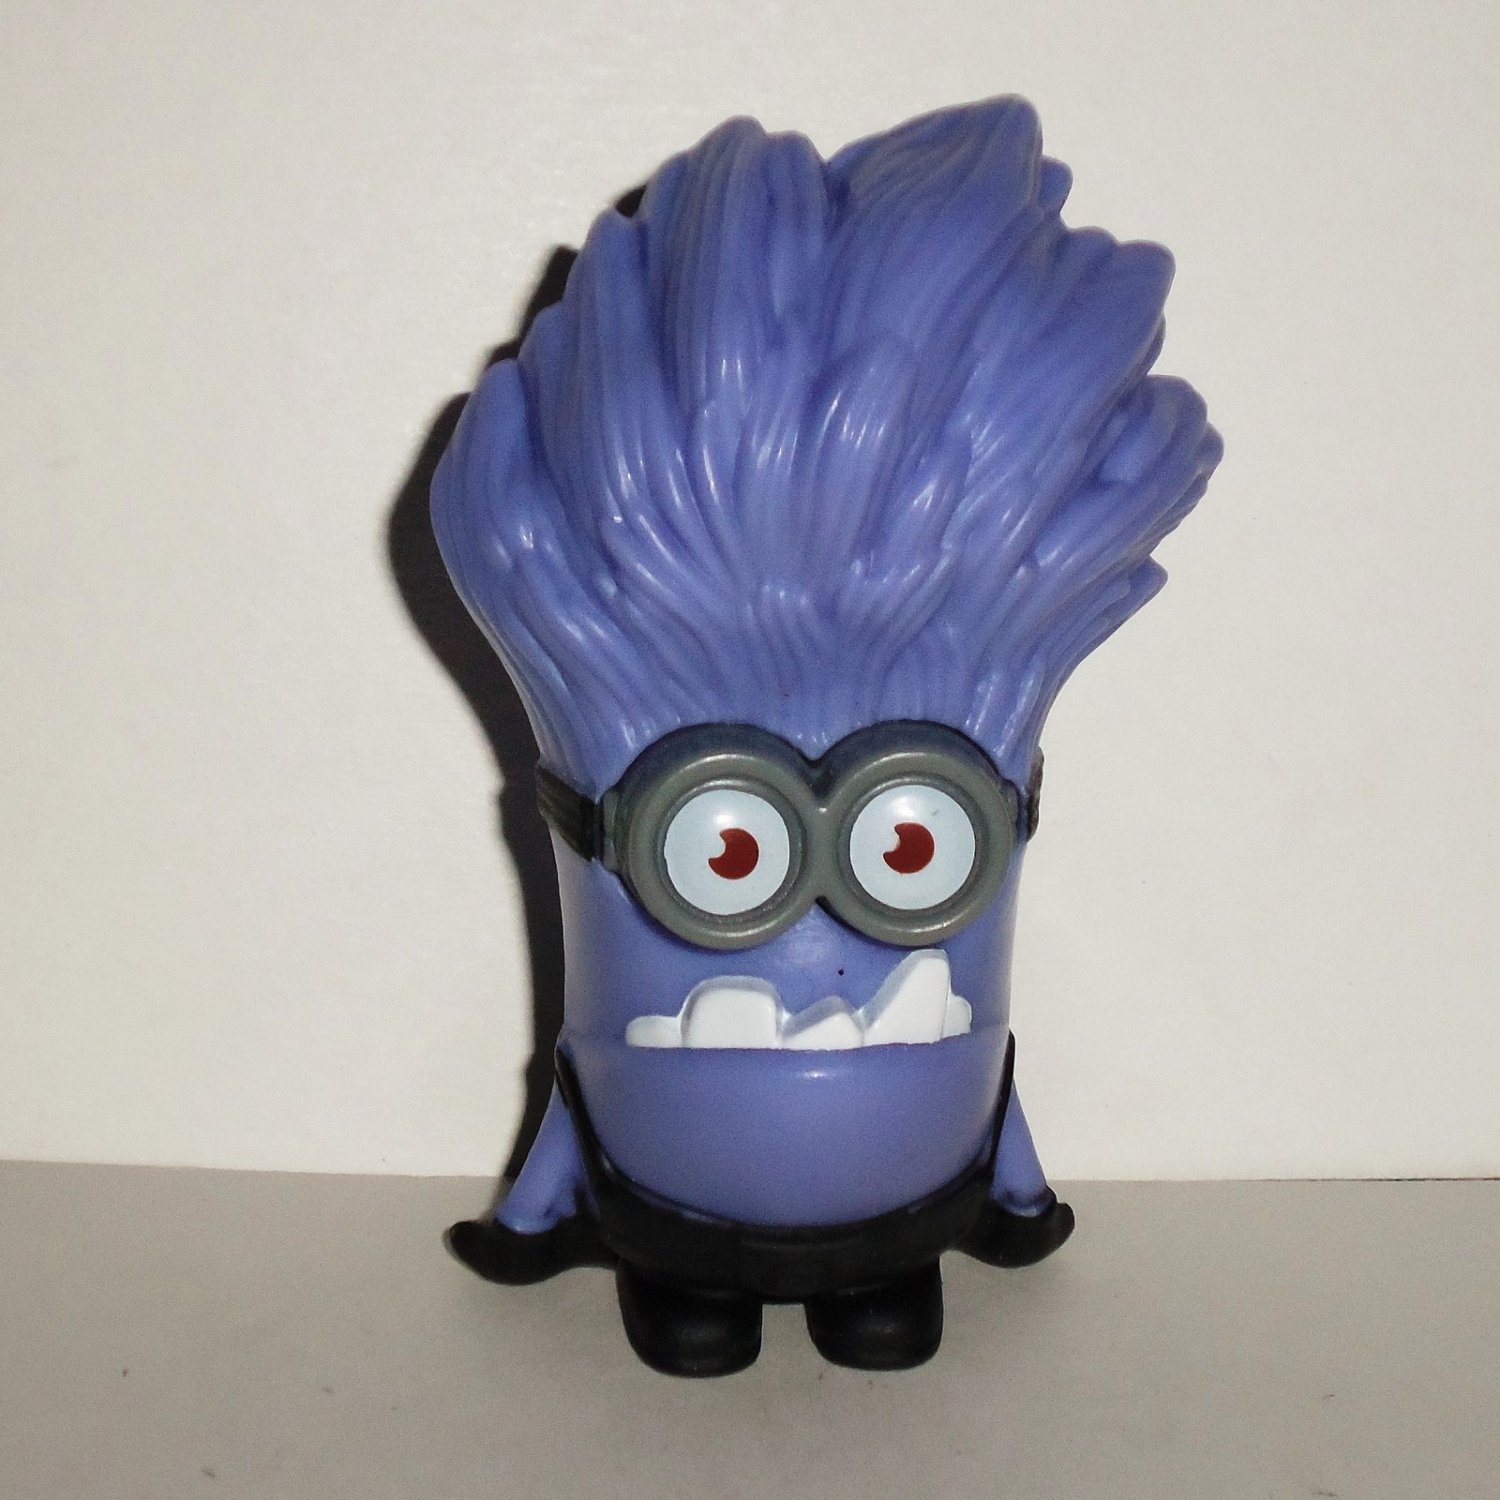 CLASSIC 2013 Despicable Me 2 McDonalds Happy Meal Toy #7 PURPLE MINION GIGGLING 